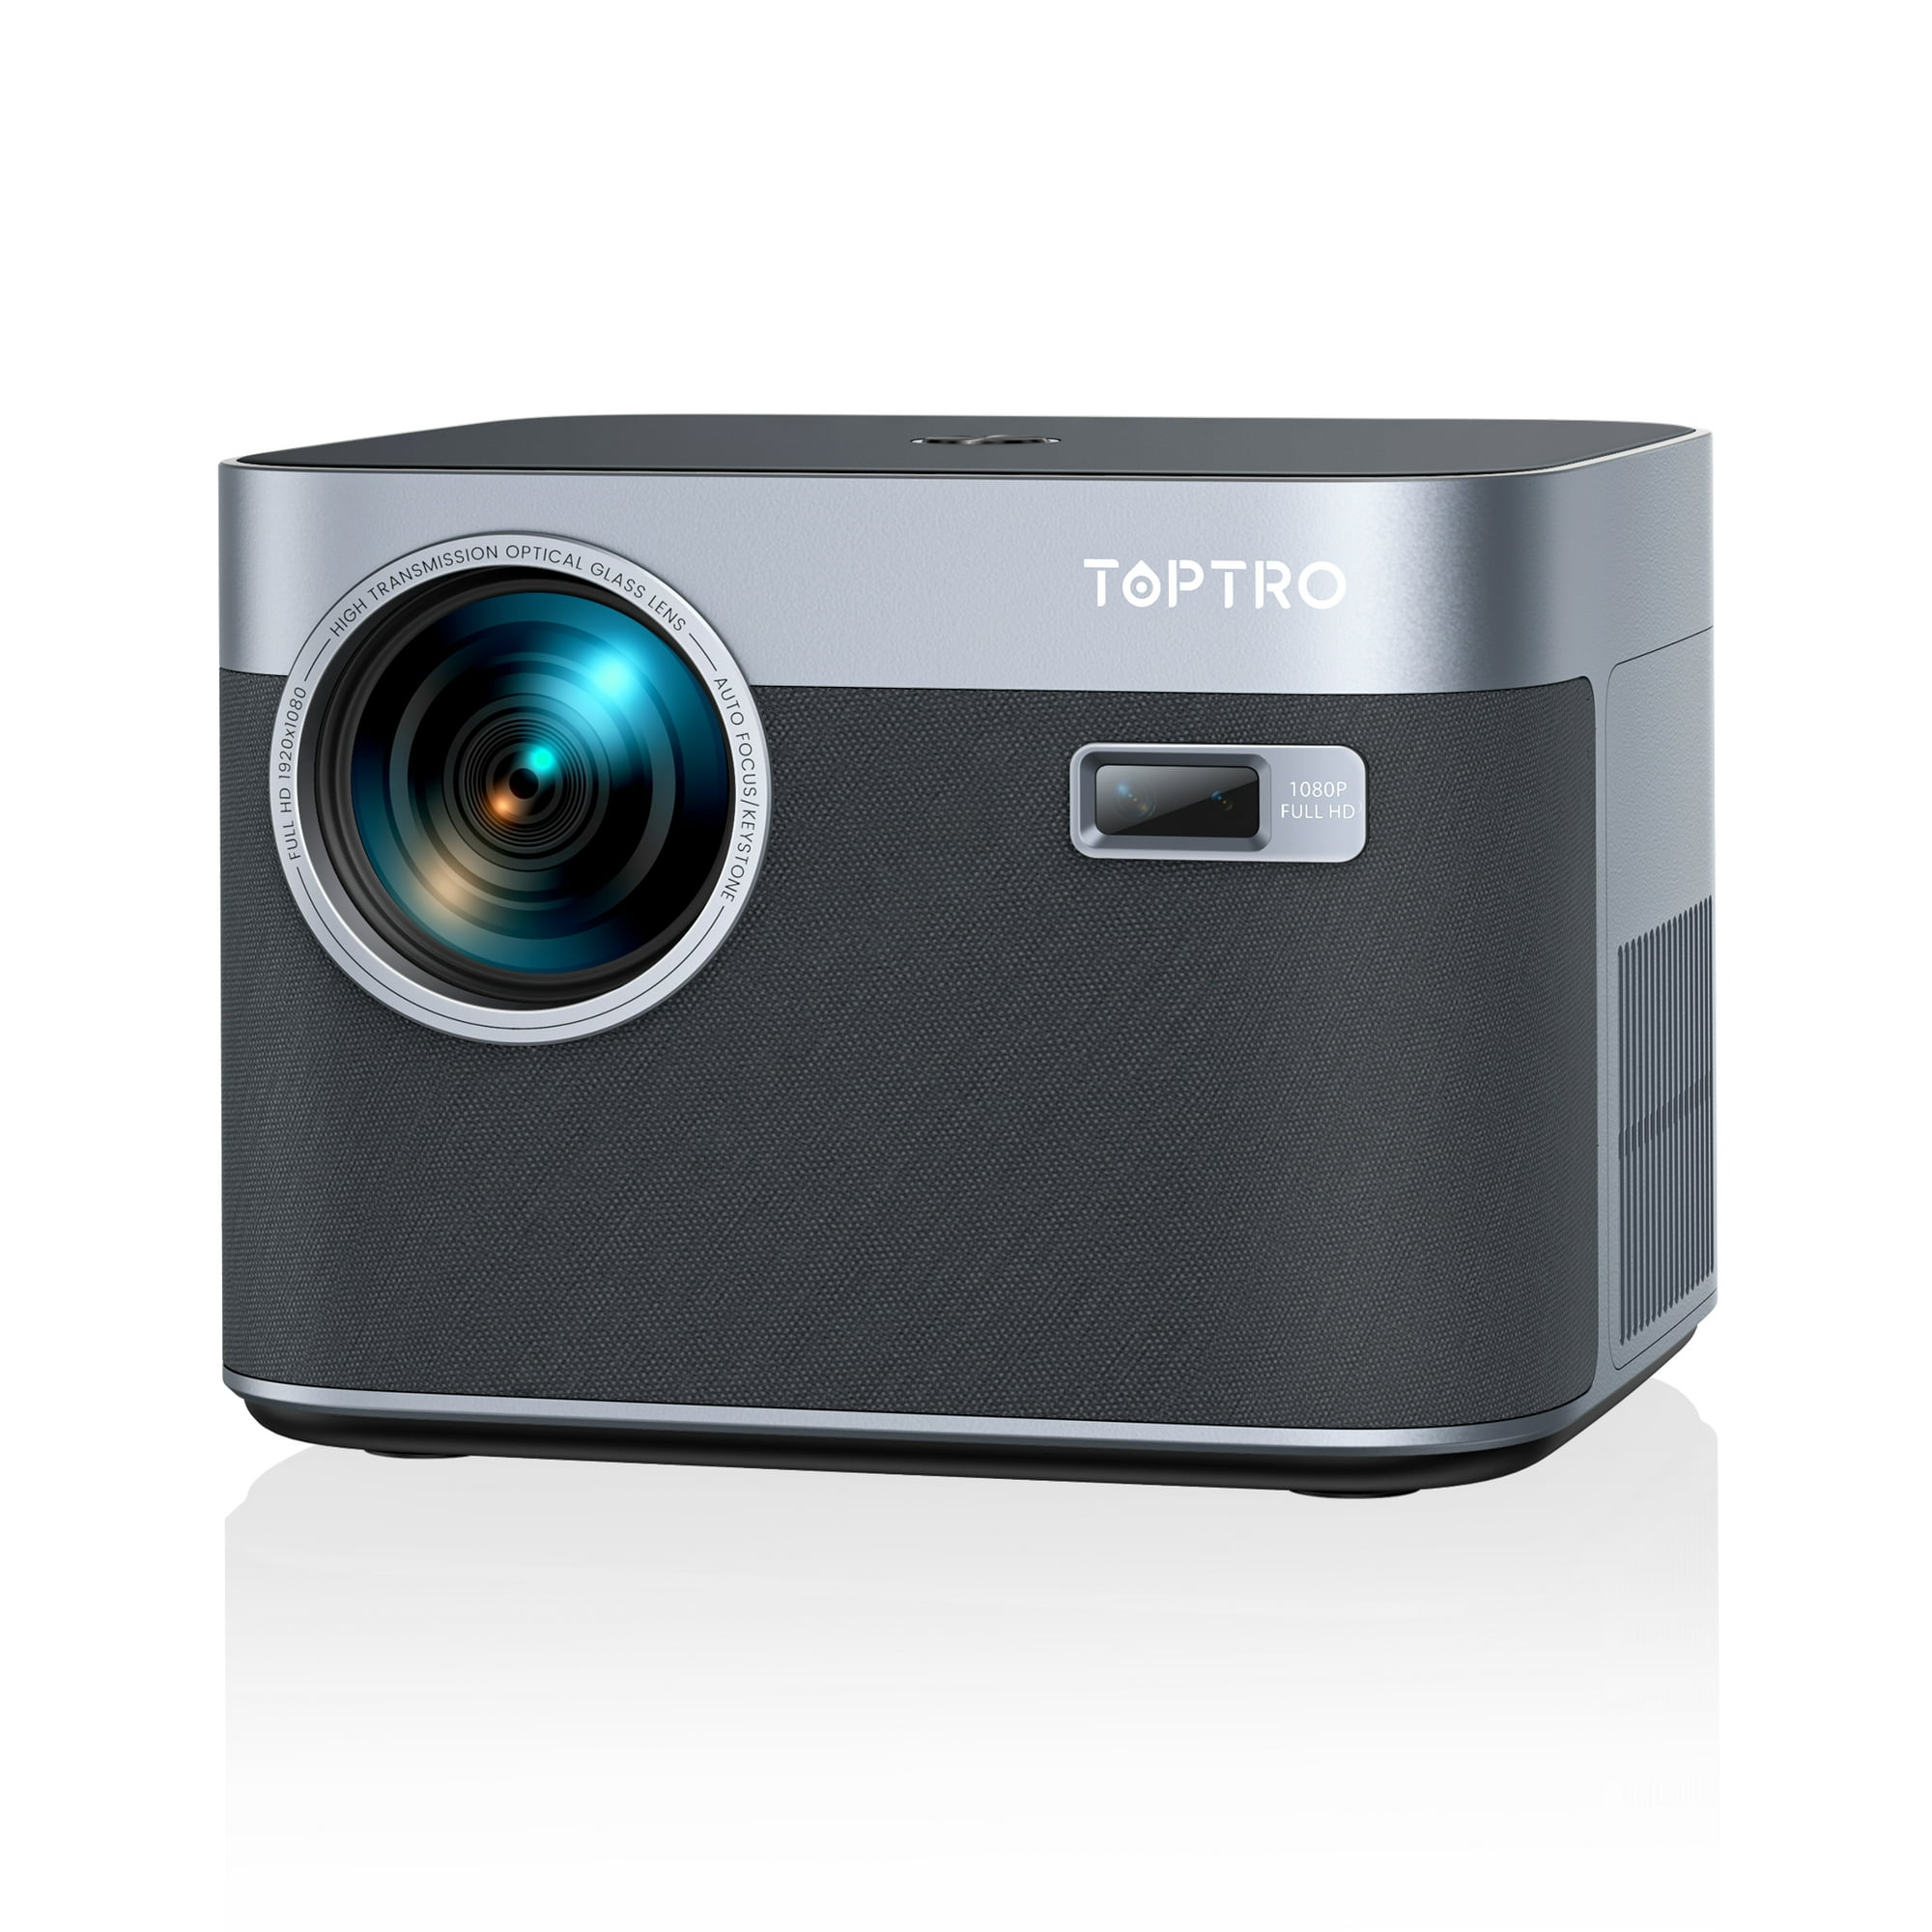 Toptro TR20 5000-Lumens LCD Portable Projector only $80.49